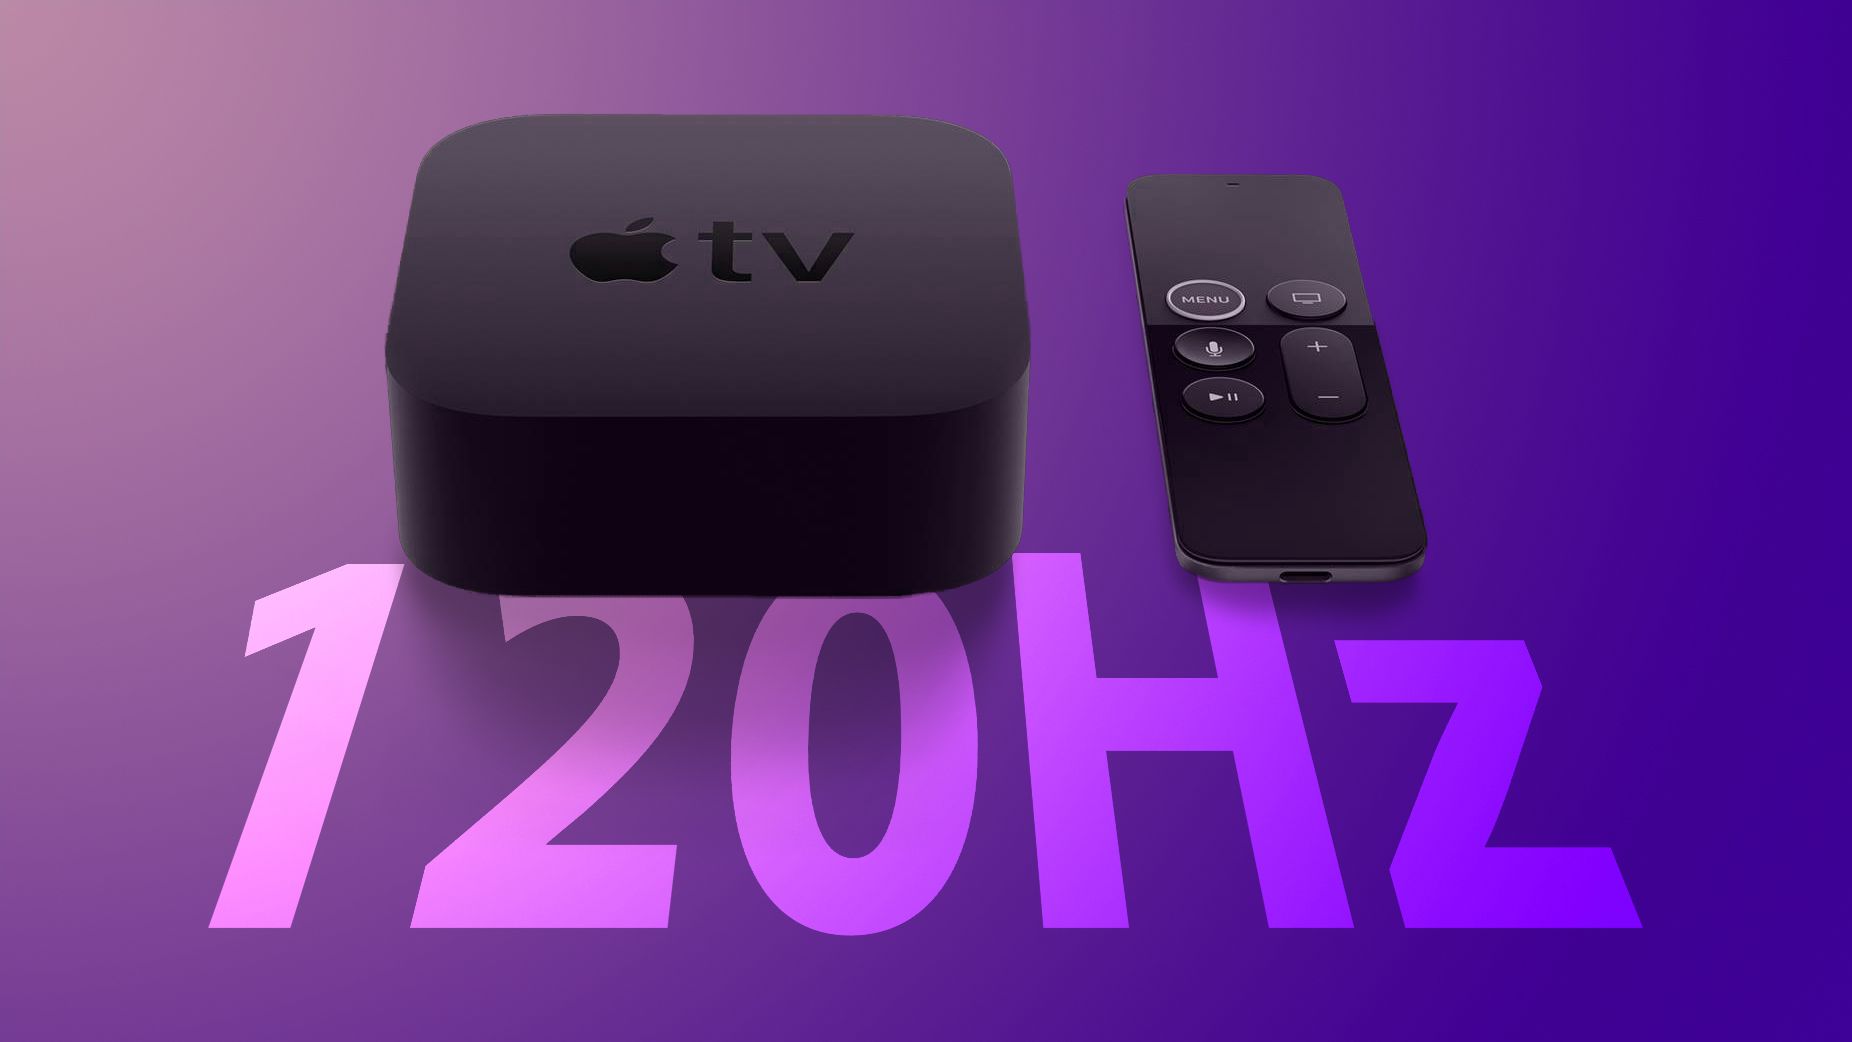 Upcoming Apple TV can support 120Hz refresh rate according to tvOS 14.5 Beta code